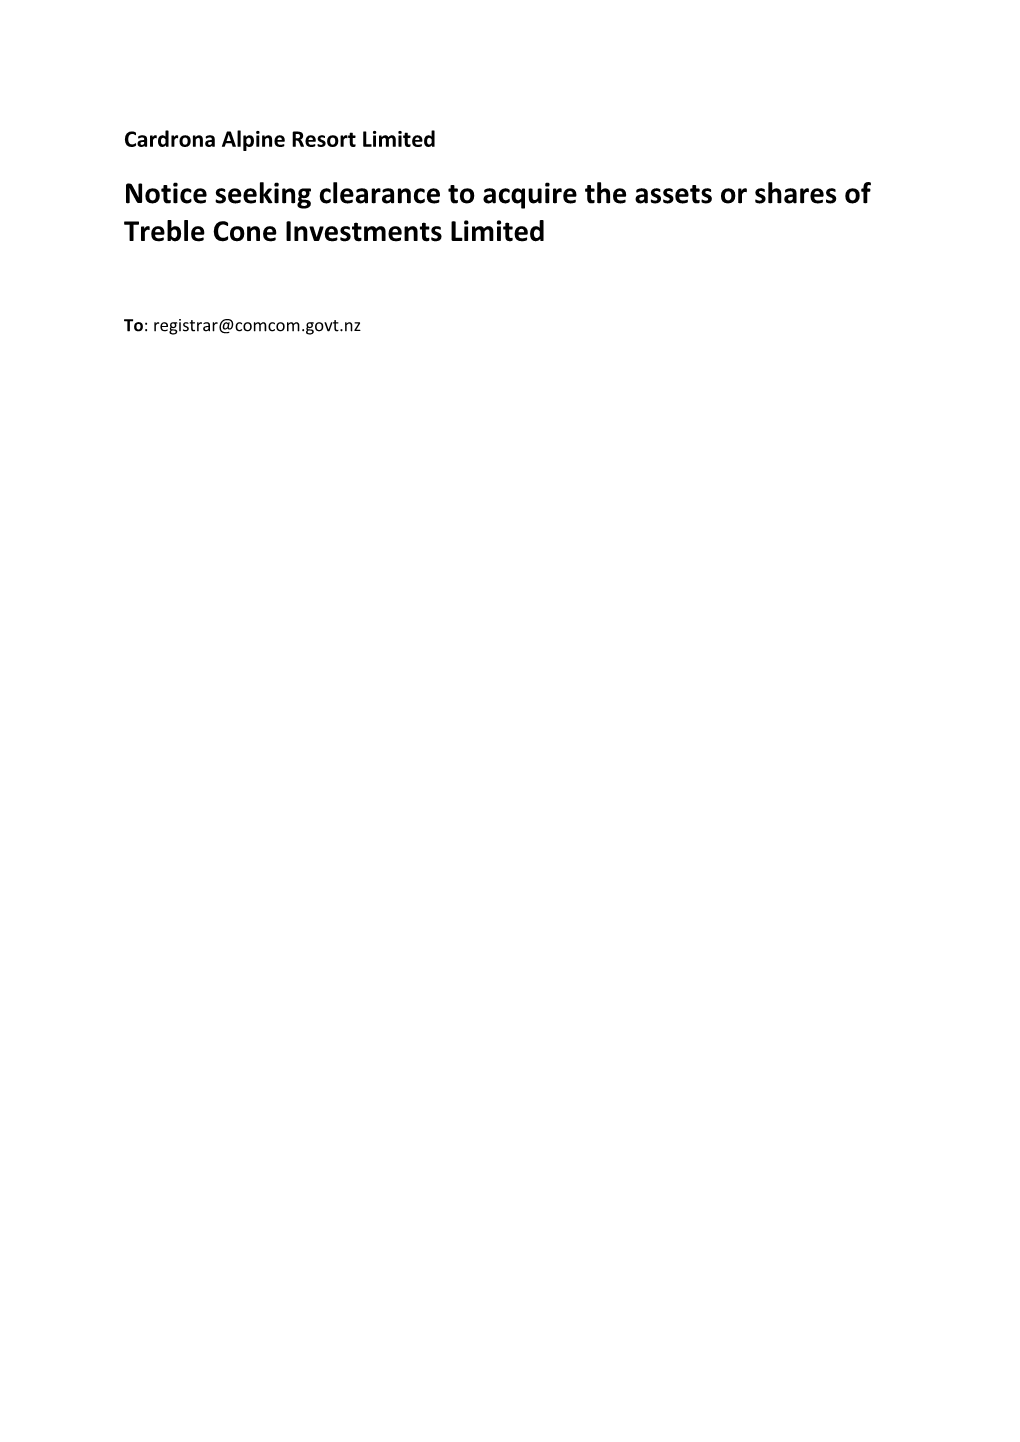 Notice Seeking Clearance to Acquire the Assets Or Shares of Treble Cone Investments Limited